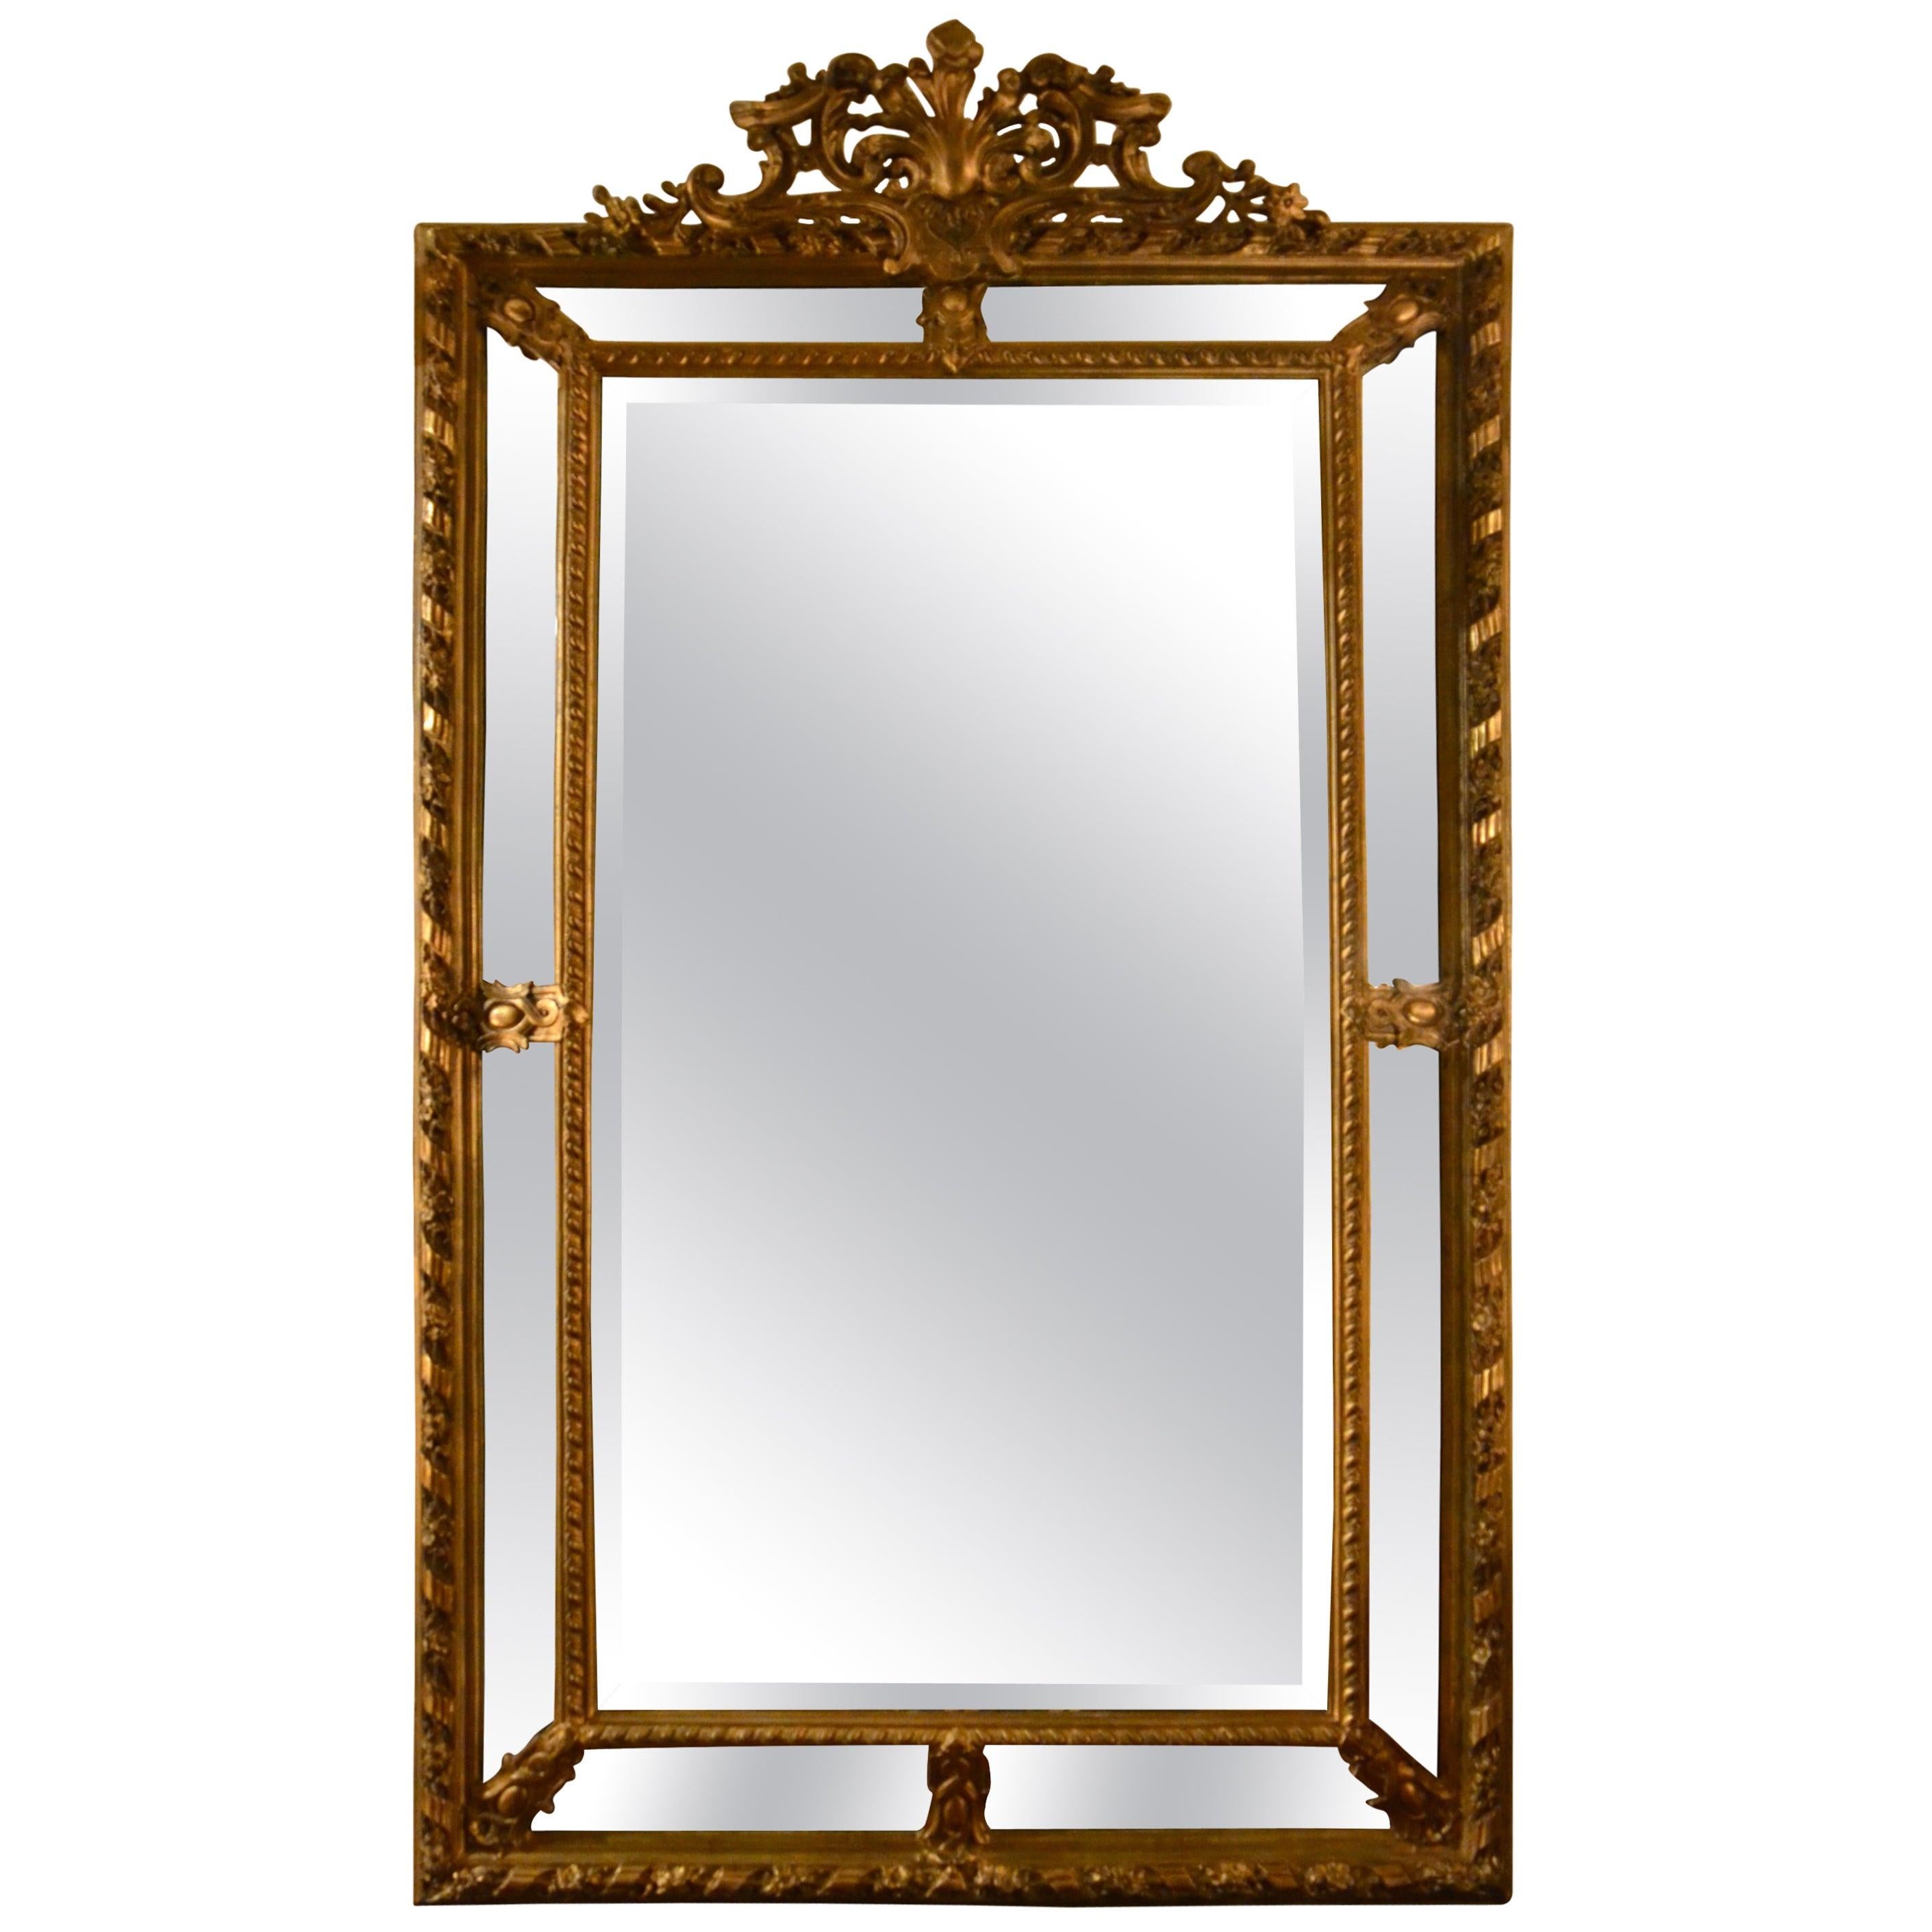 Late 19th Century Antique French Louis XVI Style Gold Color Carved Wood Panelled Mirror circa 1890 For Sale